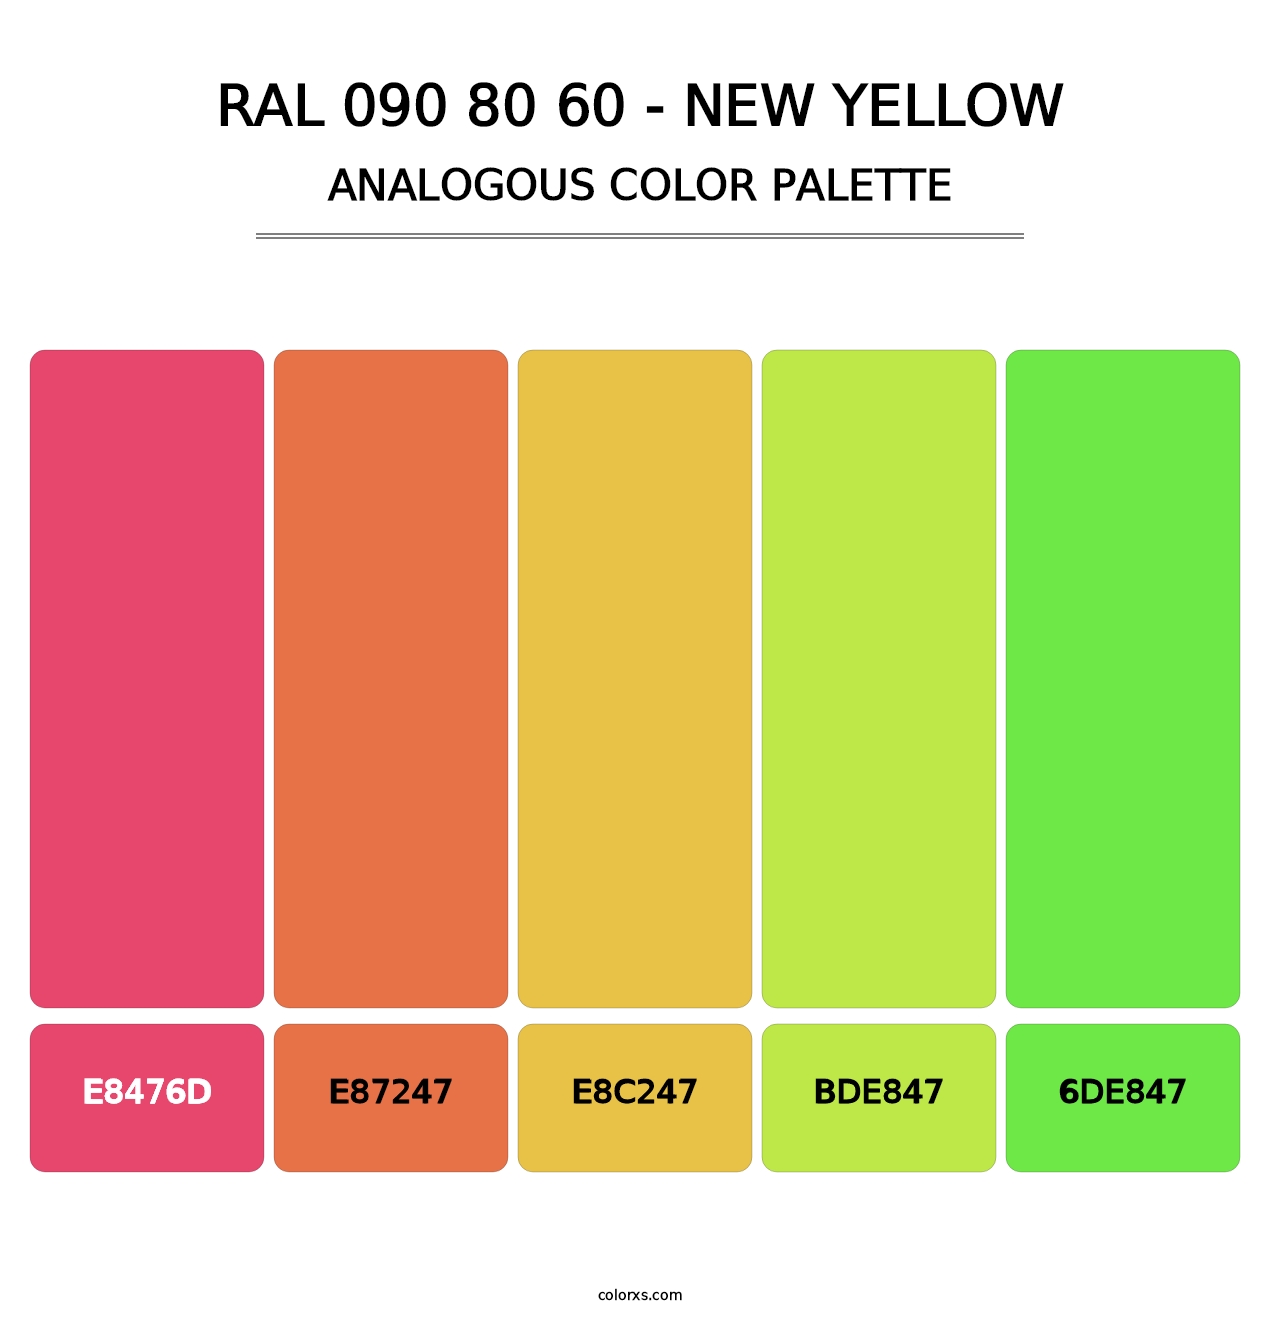 RAL 090 80 60 - New Yellow - Analogous Color Palette